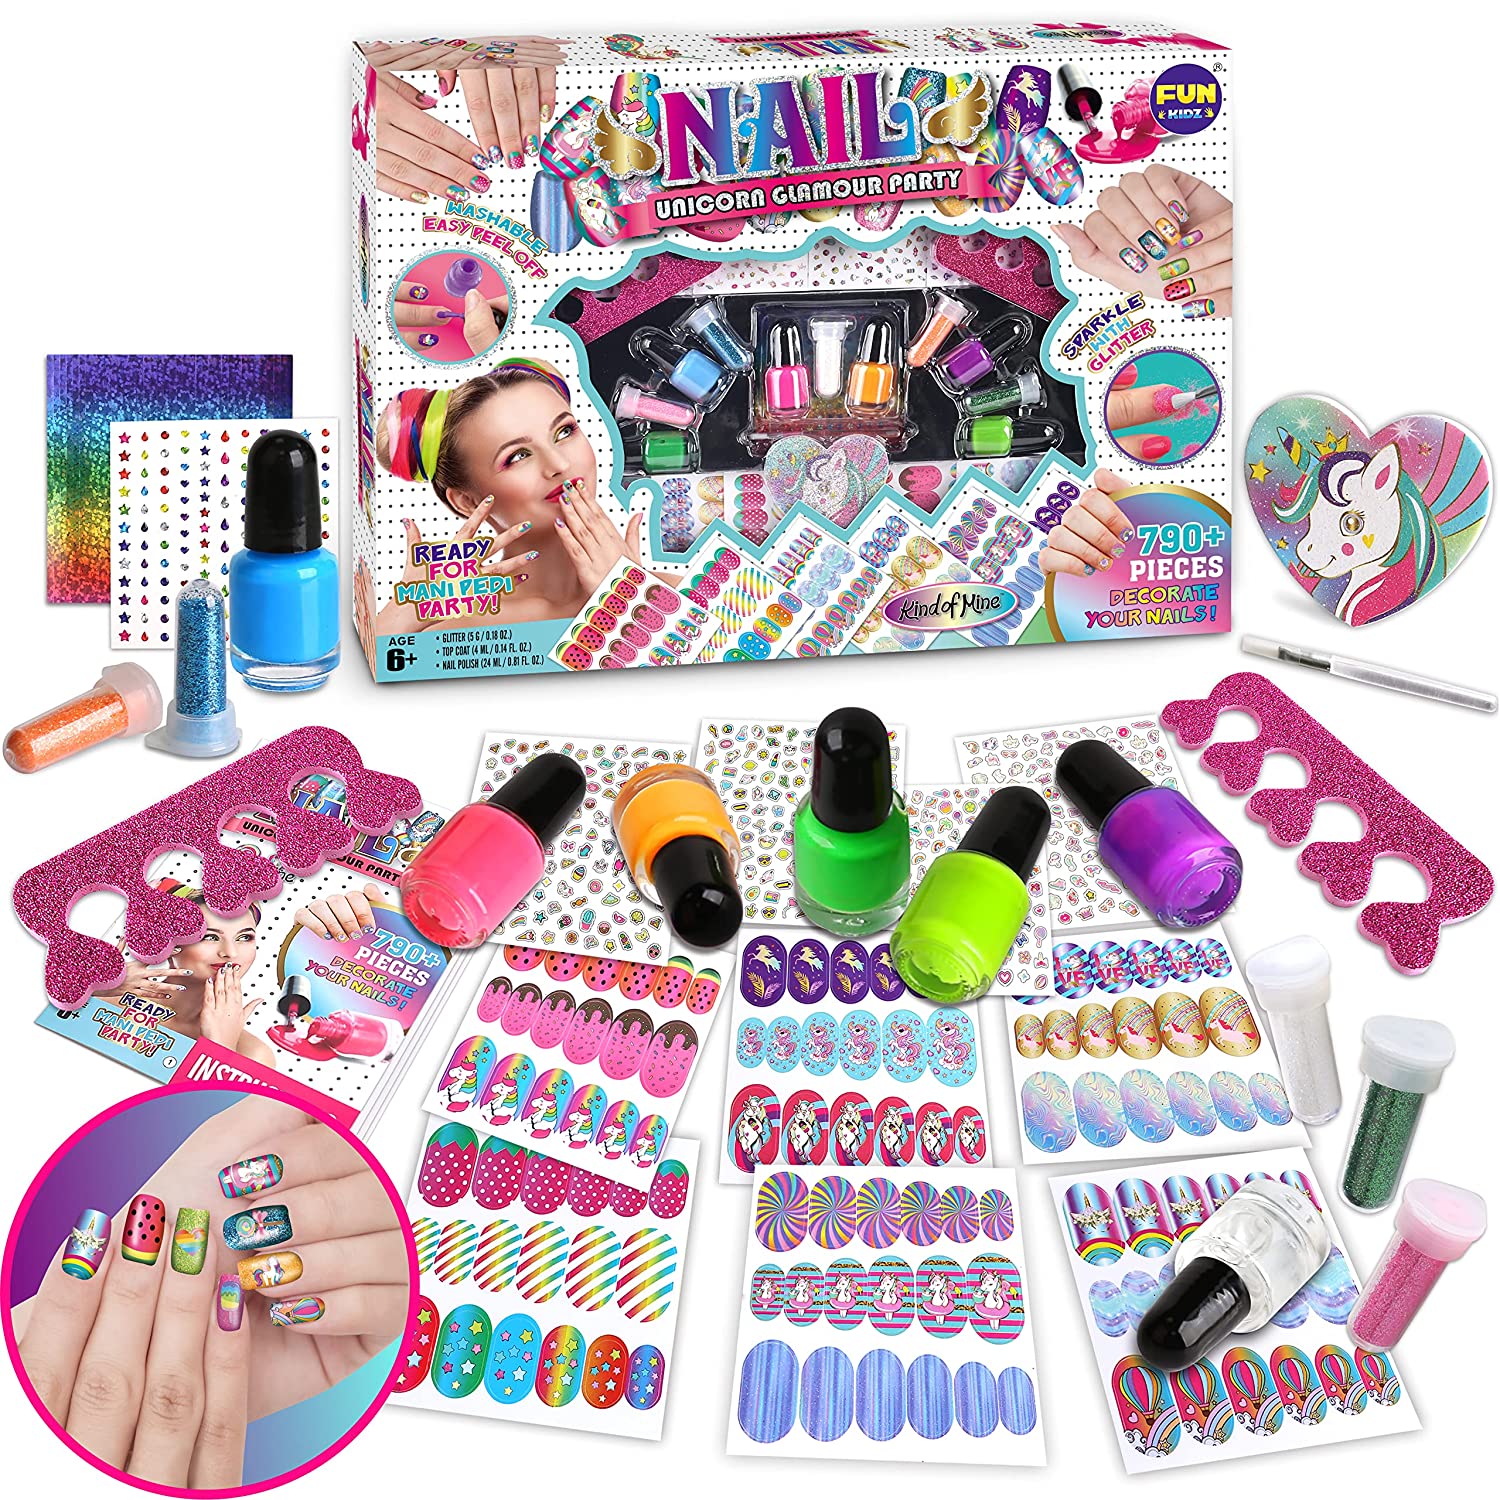 Nail Art Studio for Girls - Nail Polish Kit for Kids Ages 7-12 Years Old -  Girl Gifts Ideas - Girls Nails Gift Set - Cool Girly Stuff - Polish, Pens